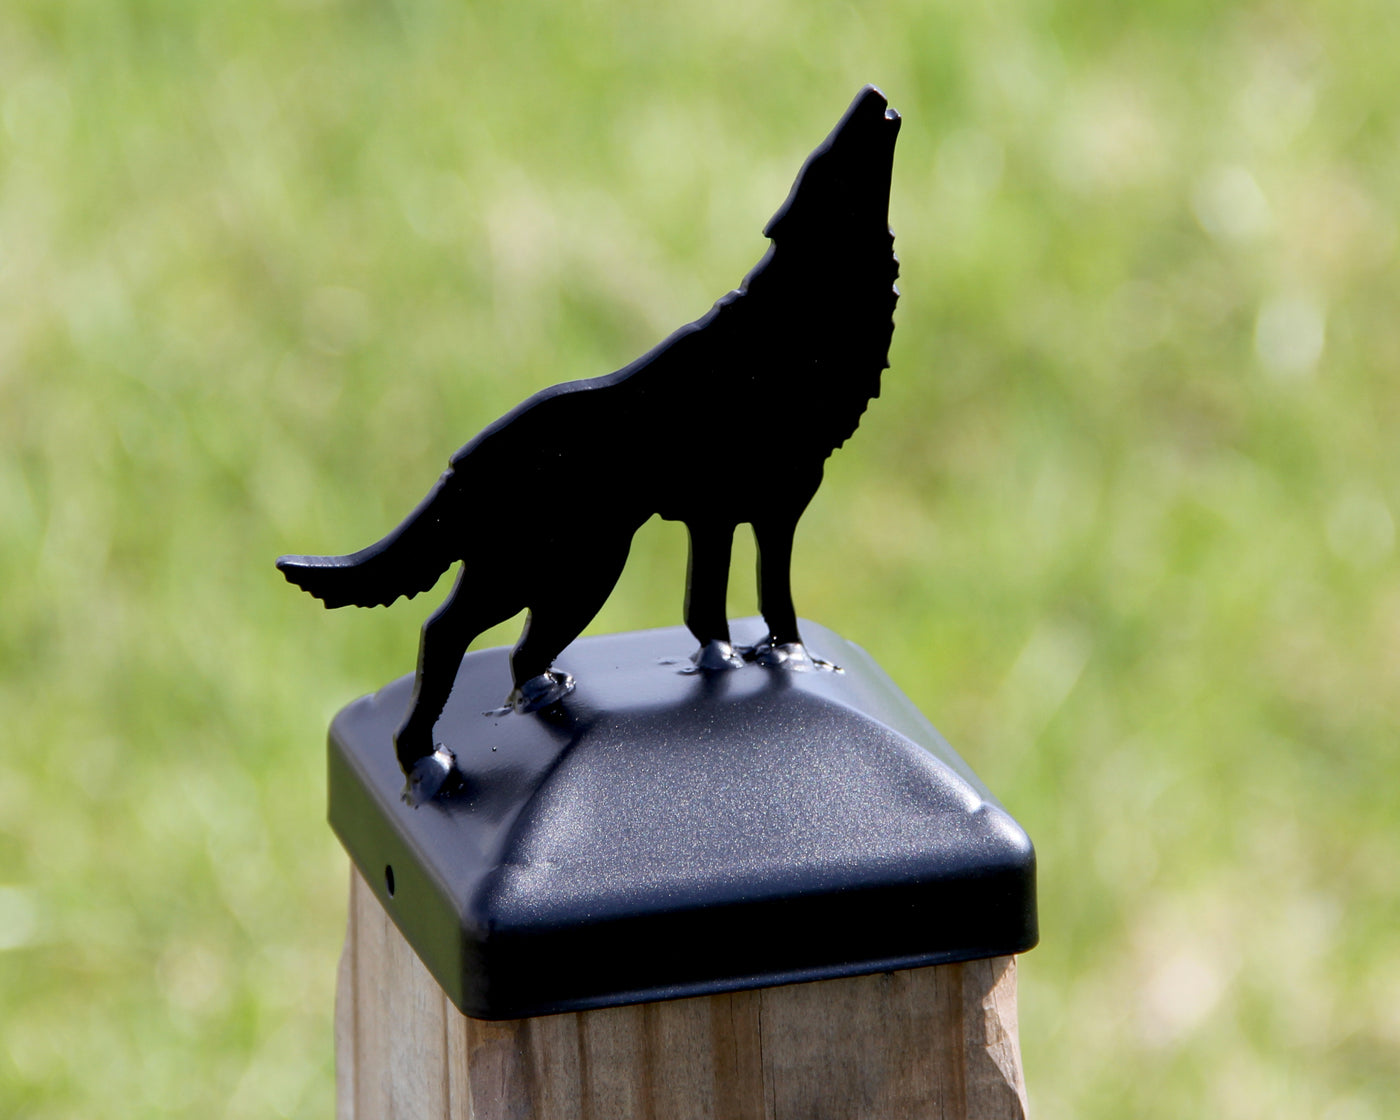 4x4 Howling Wolf Post Cap - Madison Iron and Wood - Post Cap - metal outdoor decor - Steel deocrations - american made products - veteran owned business products - fencing decorations - fencing supplies - custom wall decorations - personalized wall signs - steel - decorative post caps - steel post caps - metal post caps - brackets - structural brackets - home improvement - easter - easter decorations - easter gift - easter yard decor